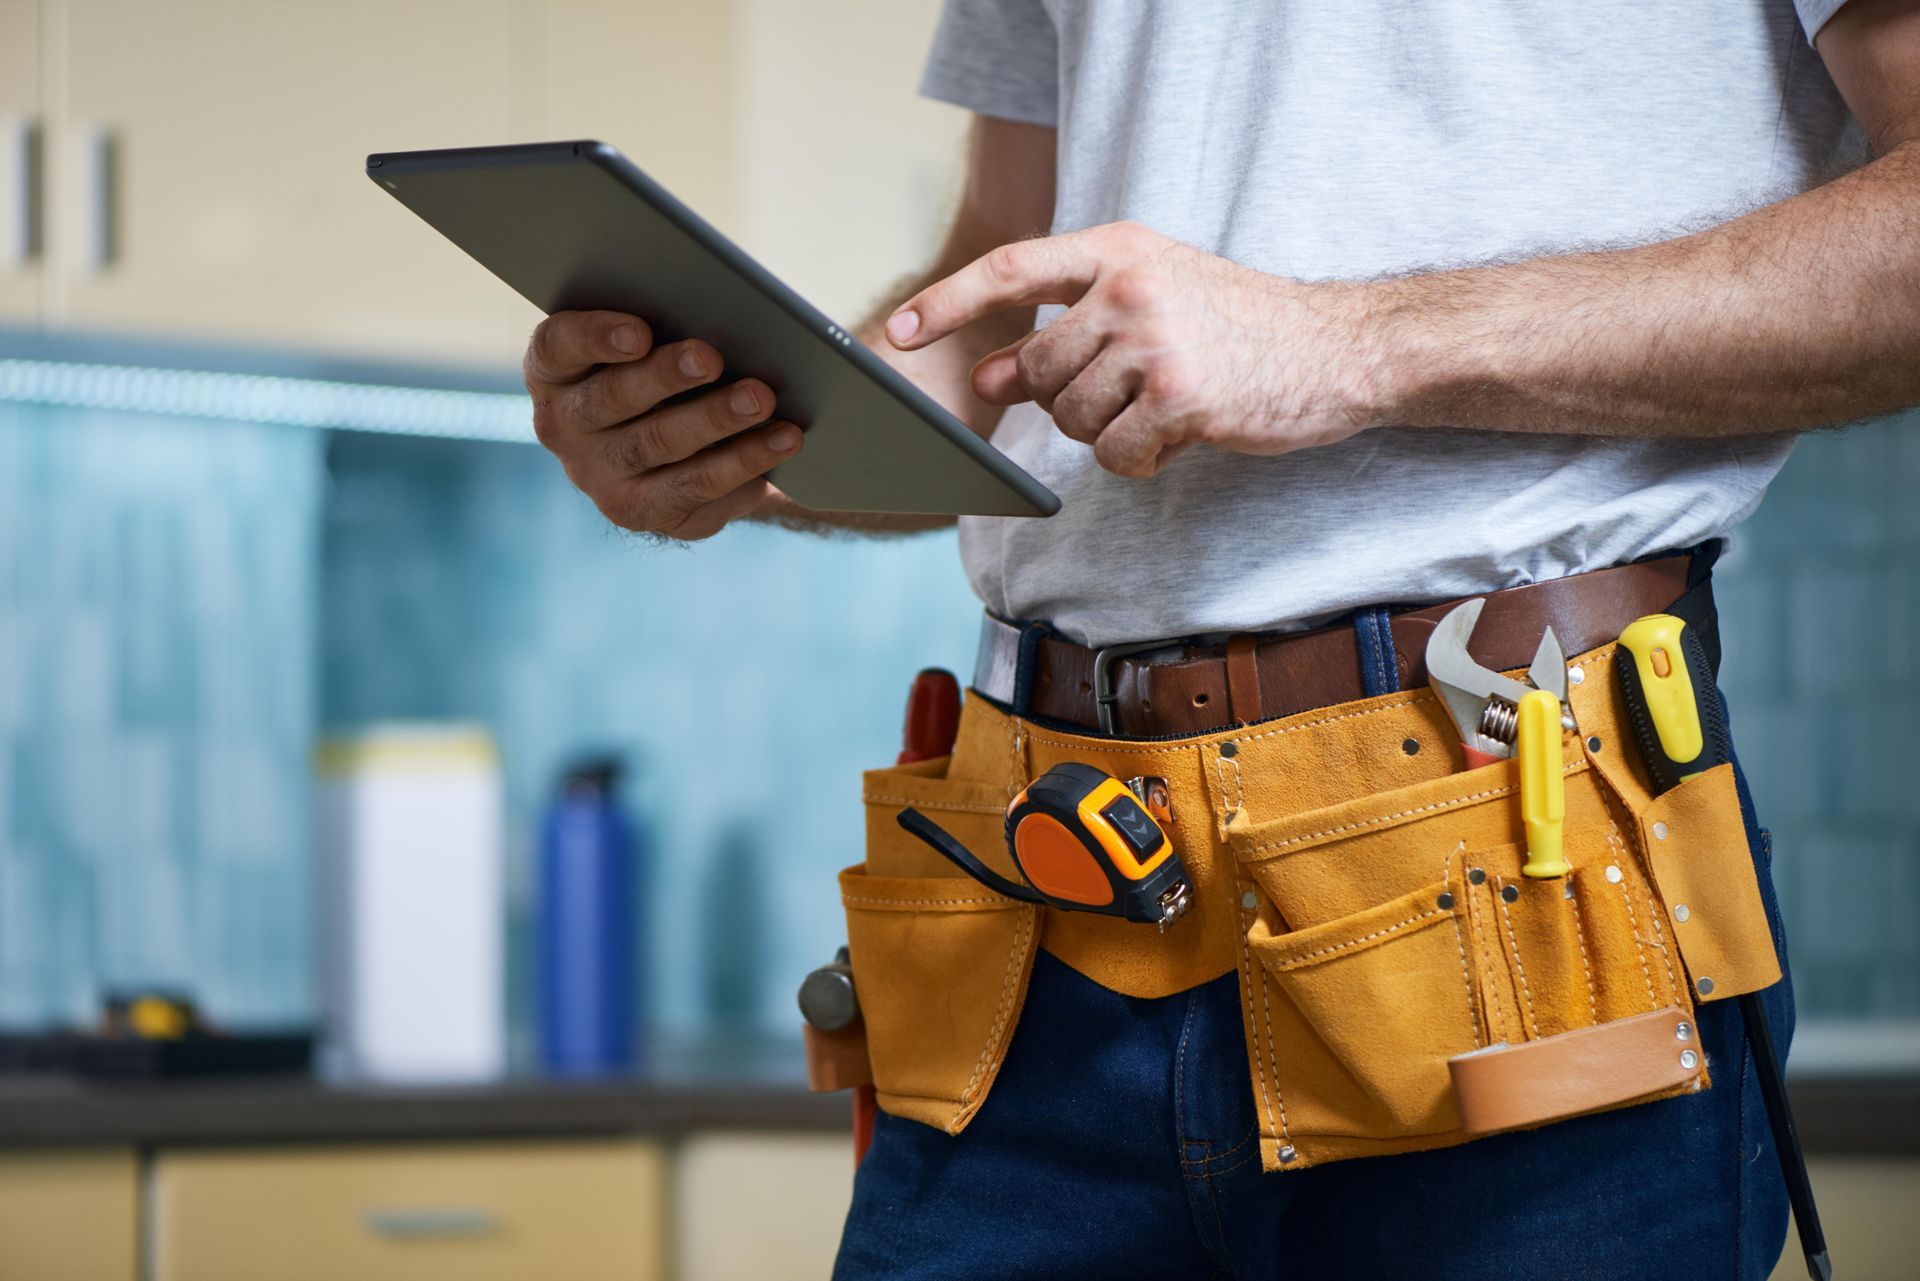 A man wearing a tool belt is using a tablet computer.